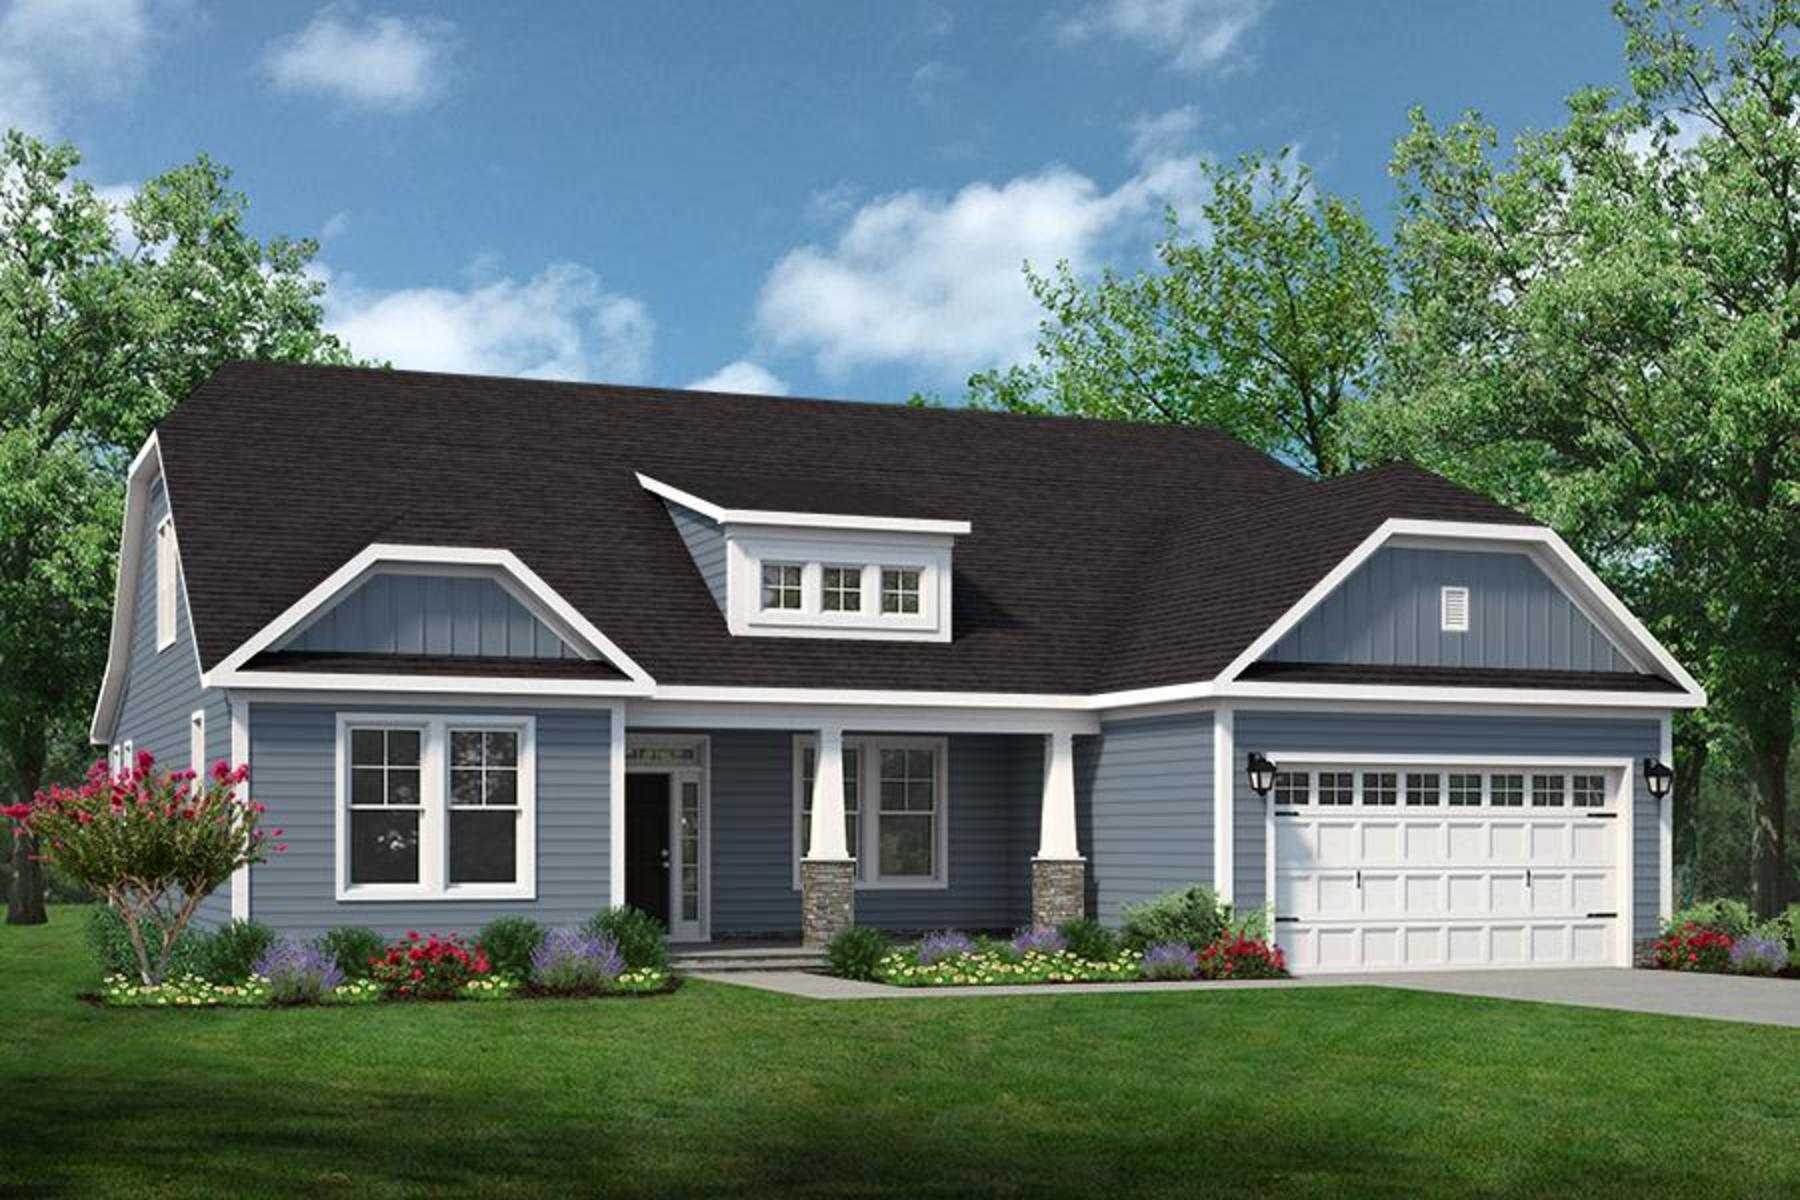 Elevation A. 3br New Home in Suffolk, VA